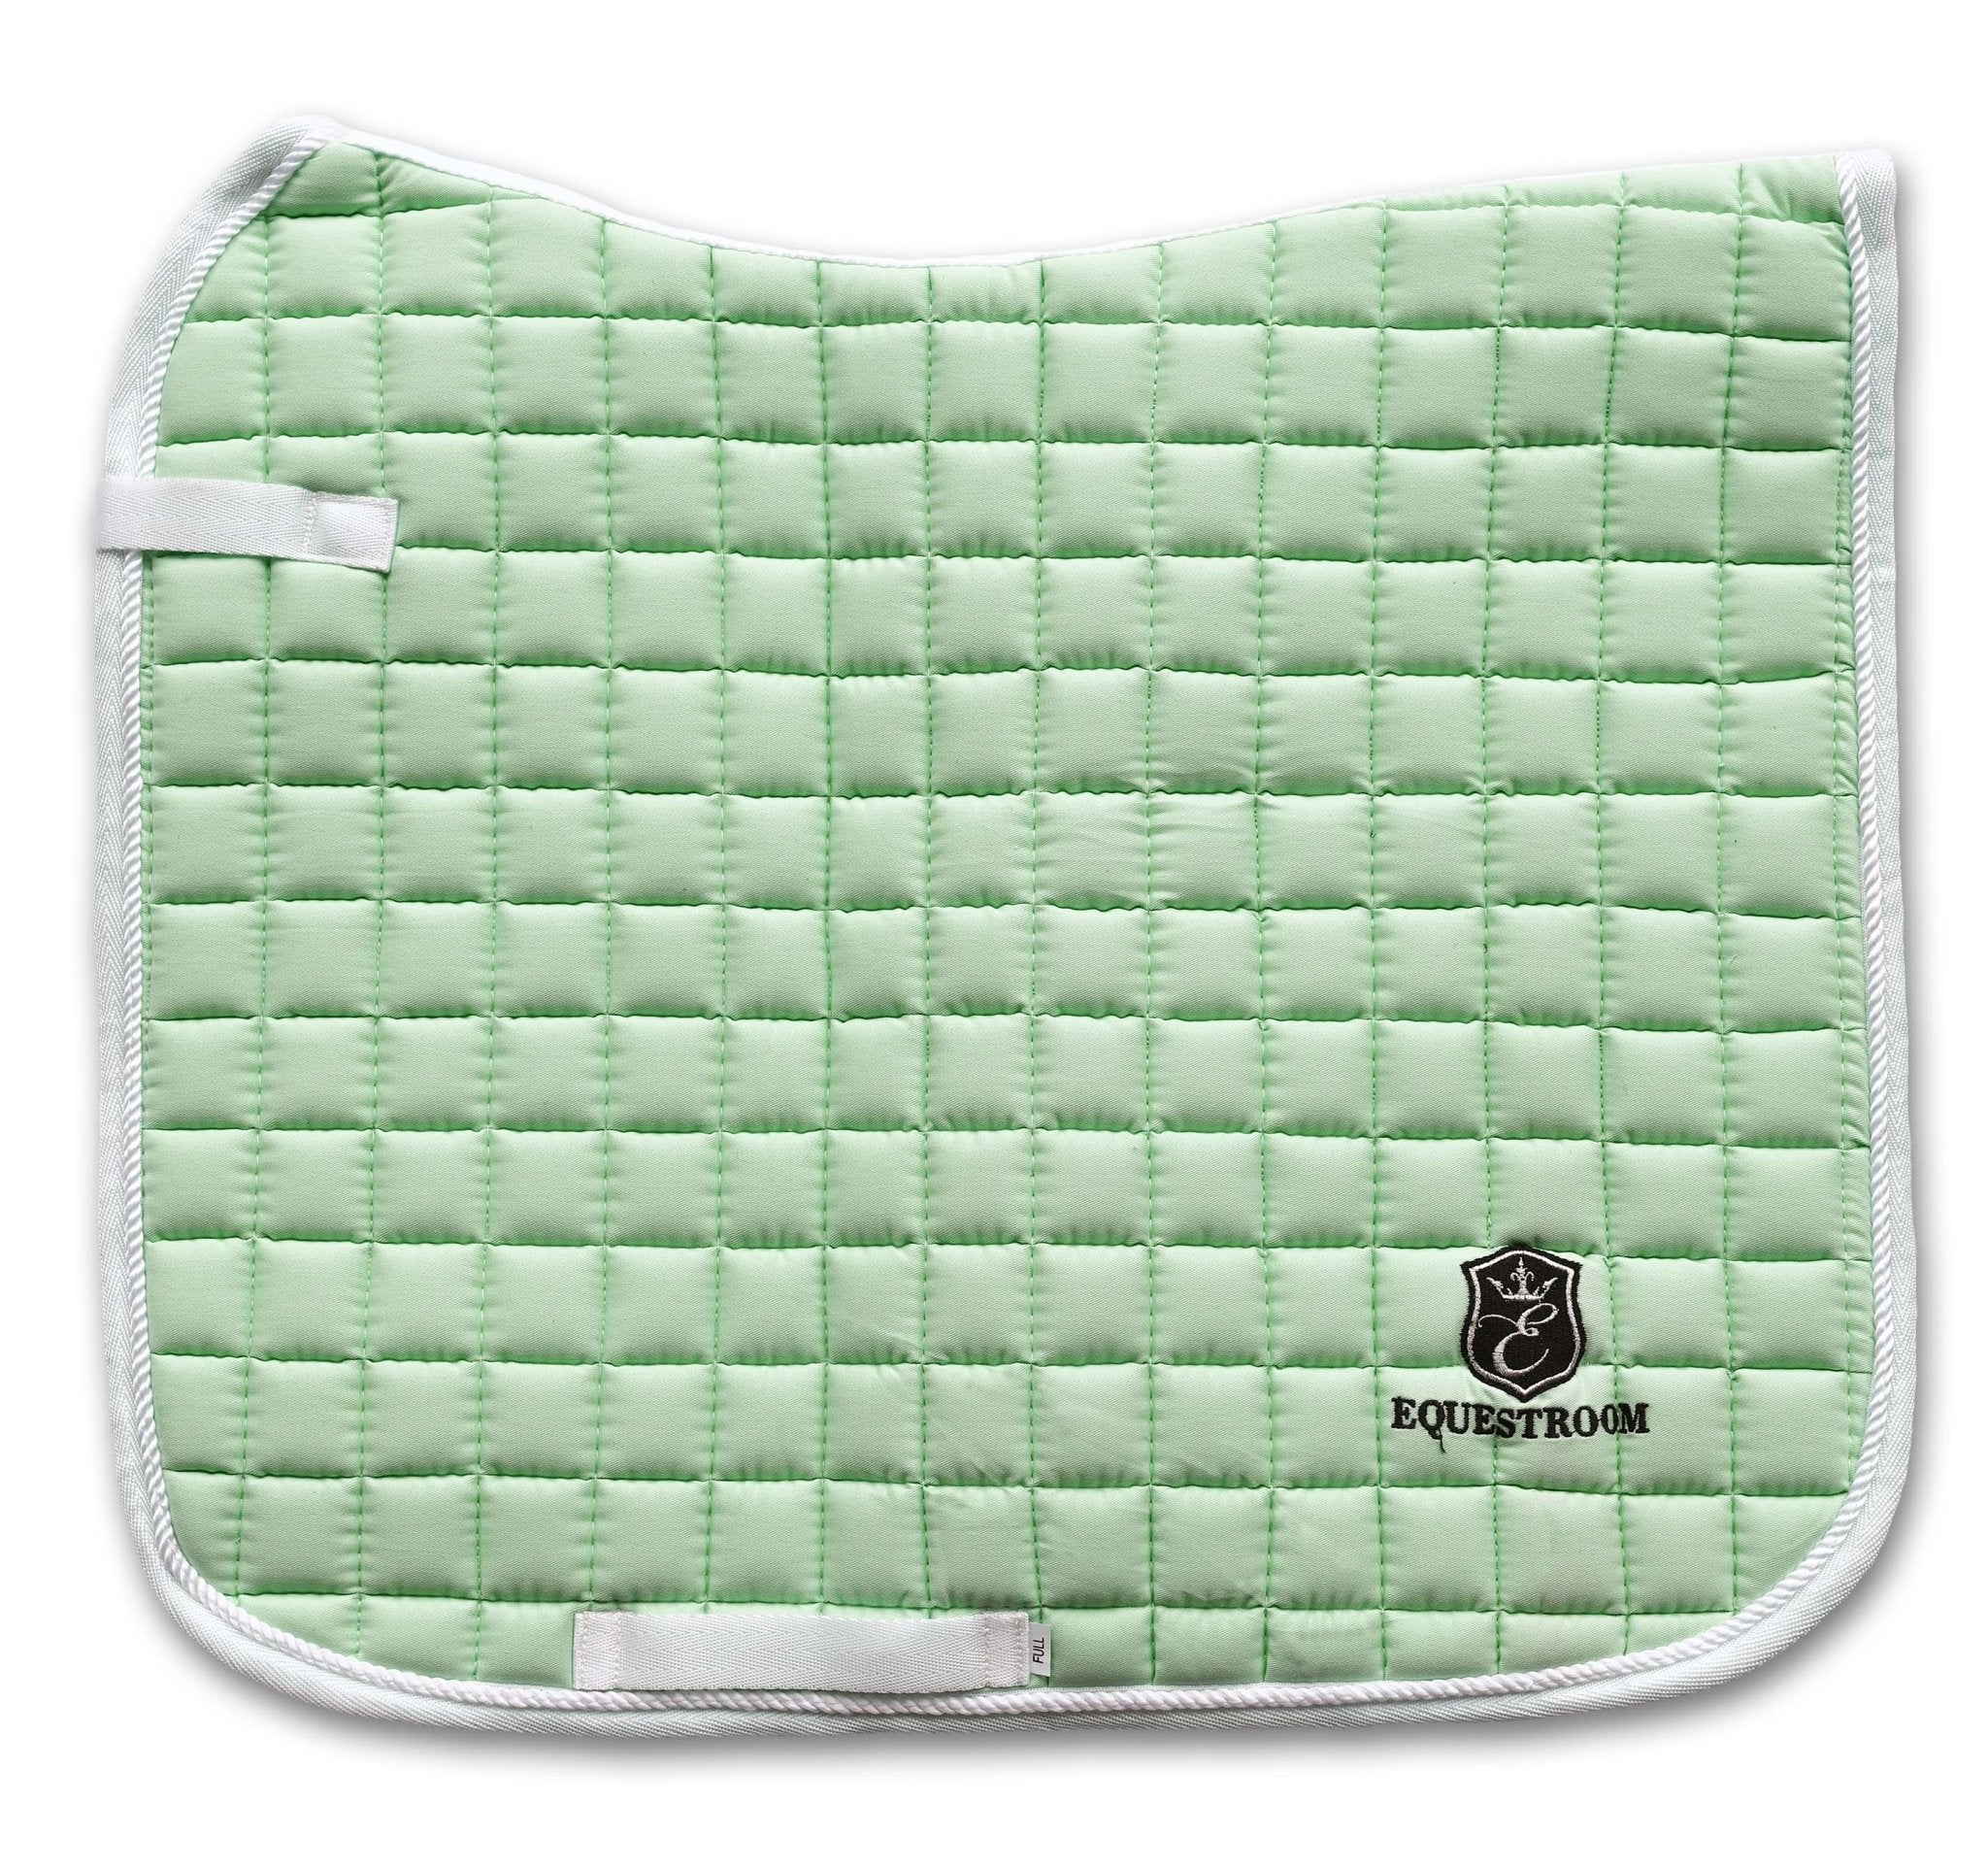 Pistachio Green Saddle Pad - Dressage or Jump - Equiluxe Tack